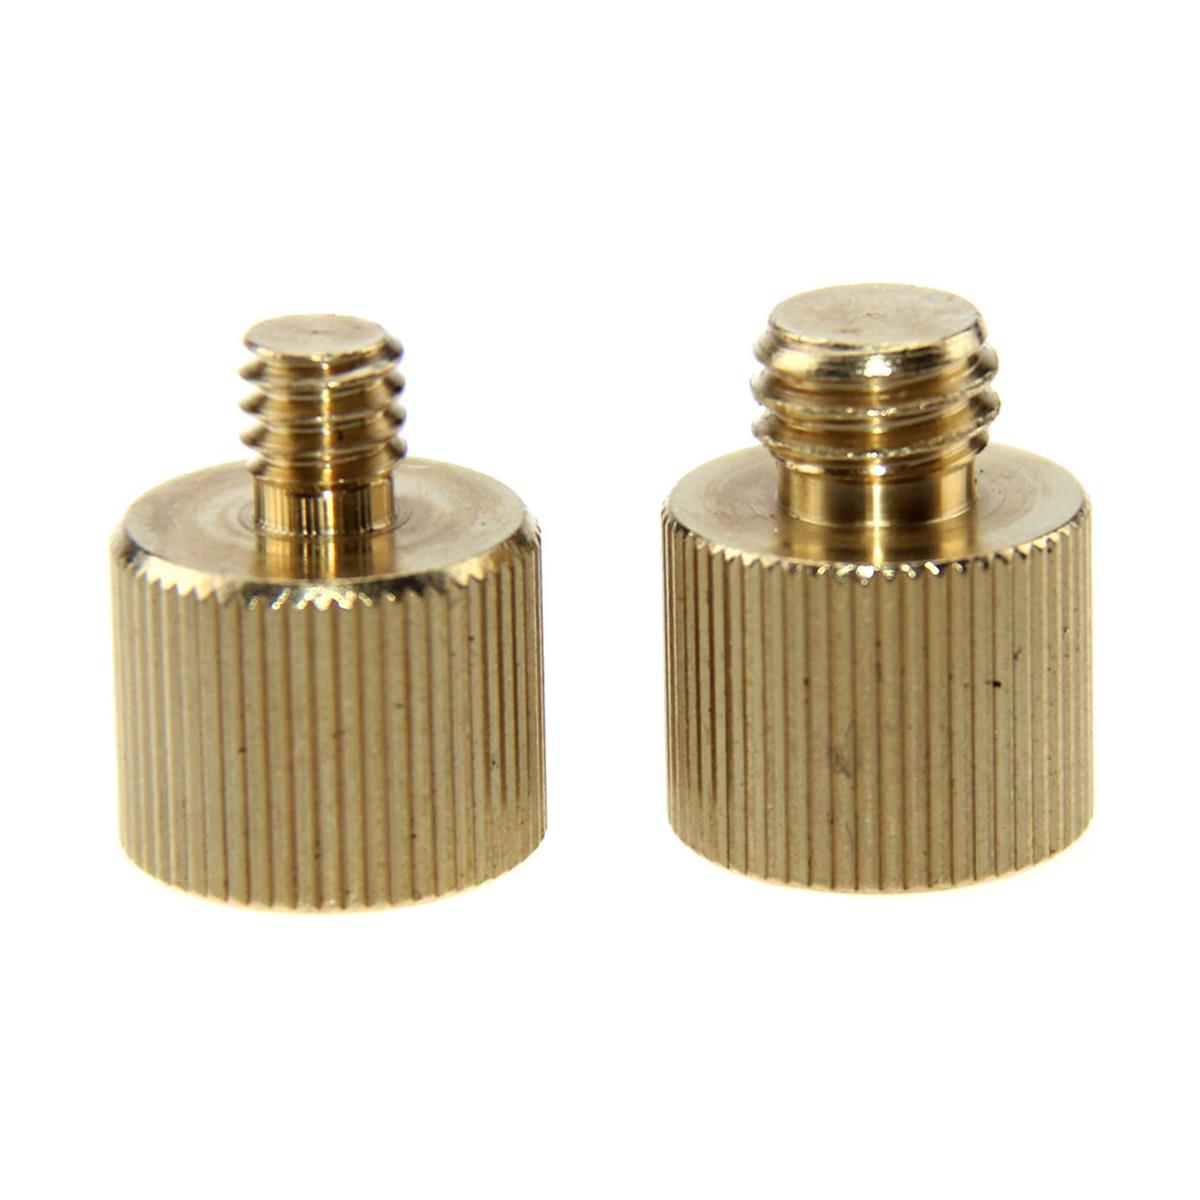 

CAMVATE 3/8"-16 F to 1/4"-20 M and 1/4"-20 F to 3/8"-16 M Screw Adapter Set